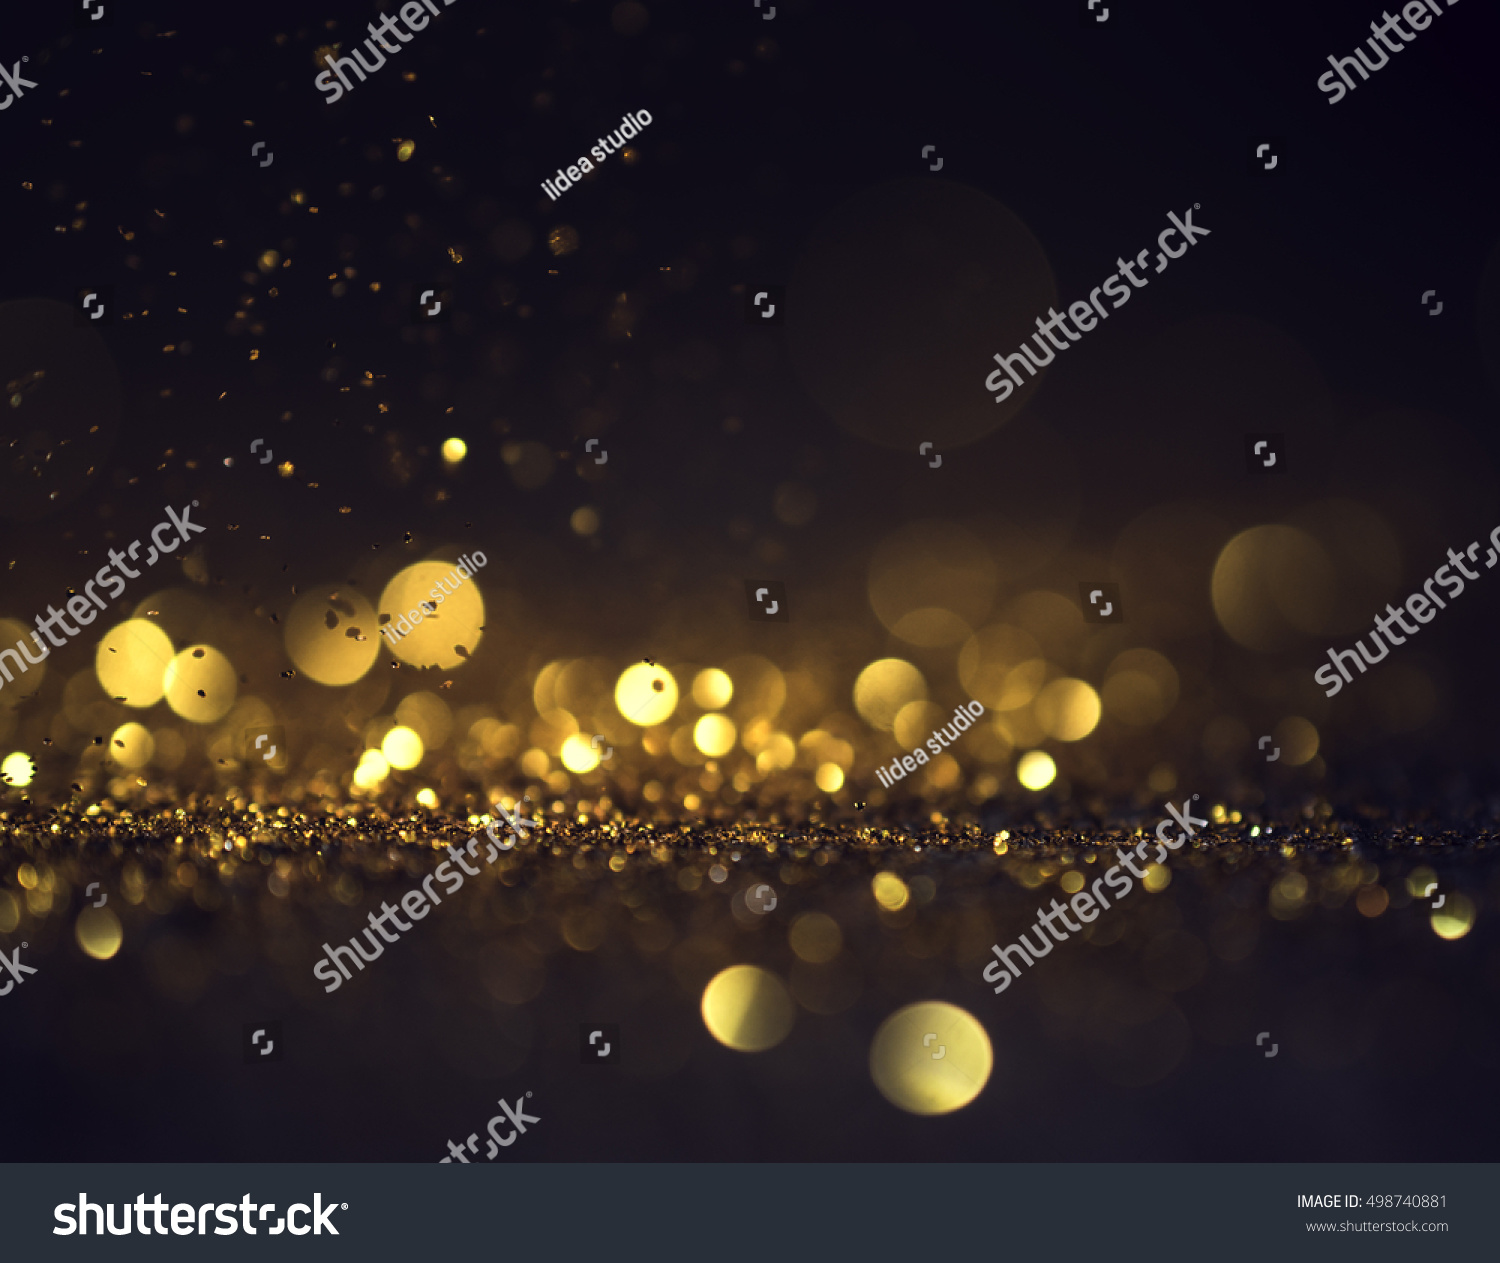 glitter lights grunge background, glitter defocused abstract Twinkly Lights and Stars Christmas Background. #498740881